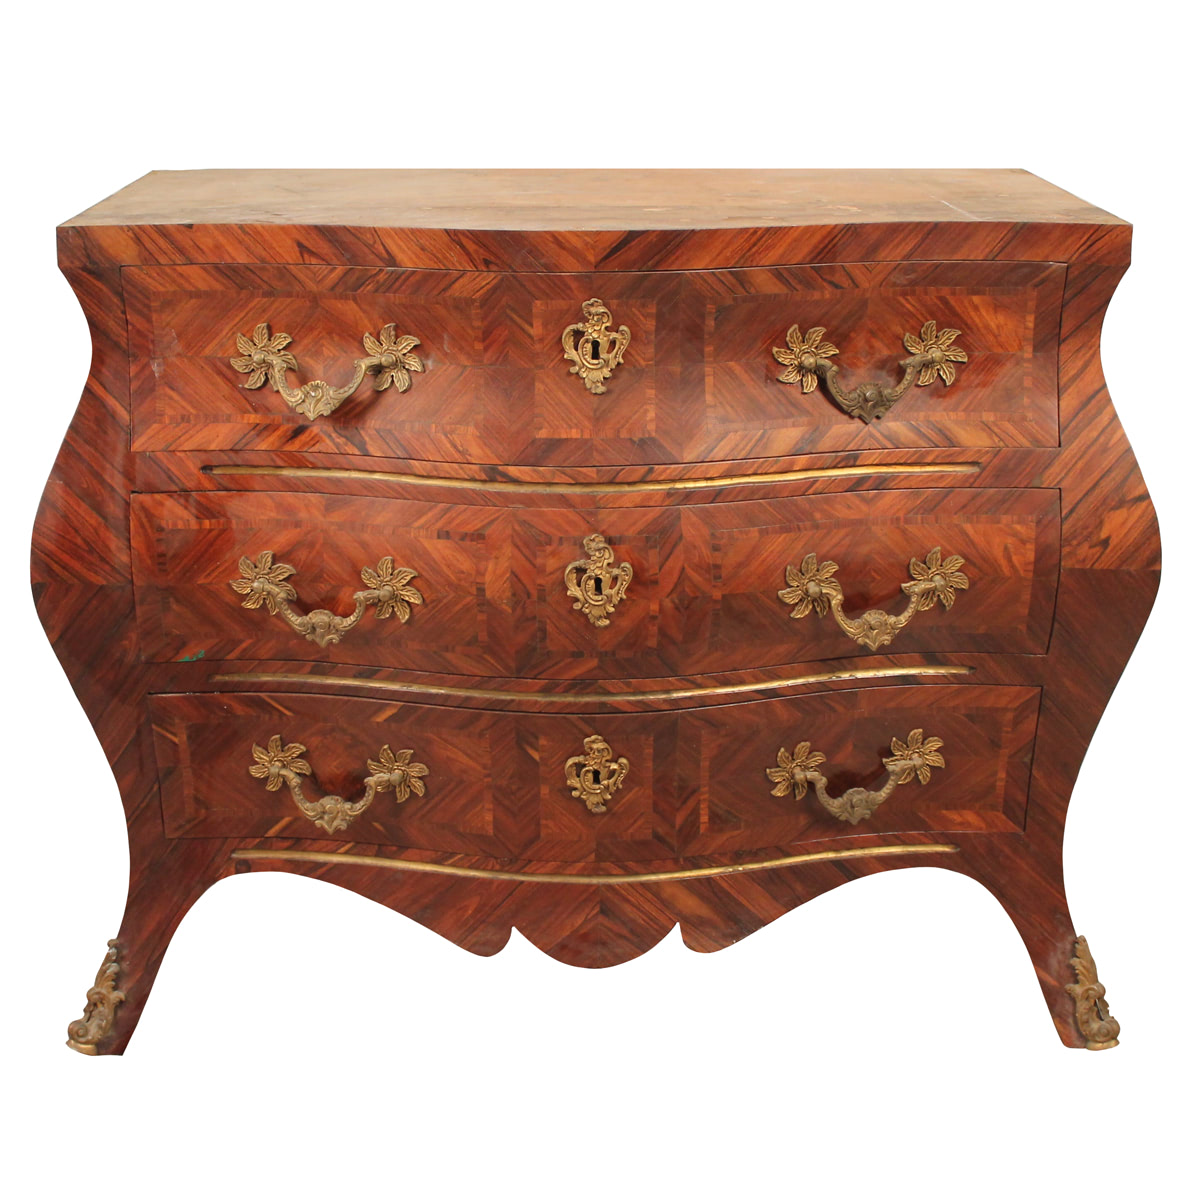 CASSETTONE A TRE CASSETTI - COMMODE WITH THREE DRAWERS